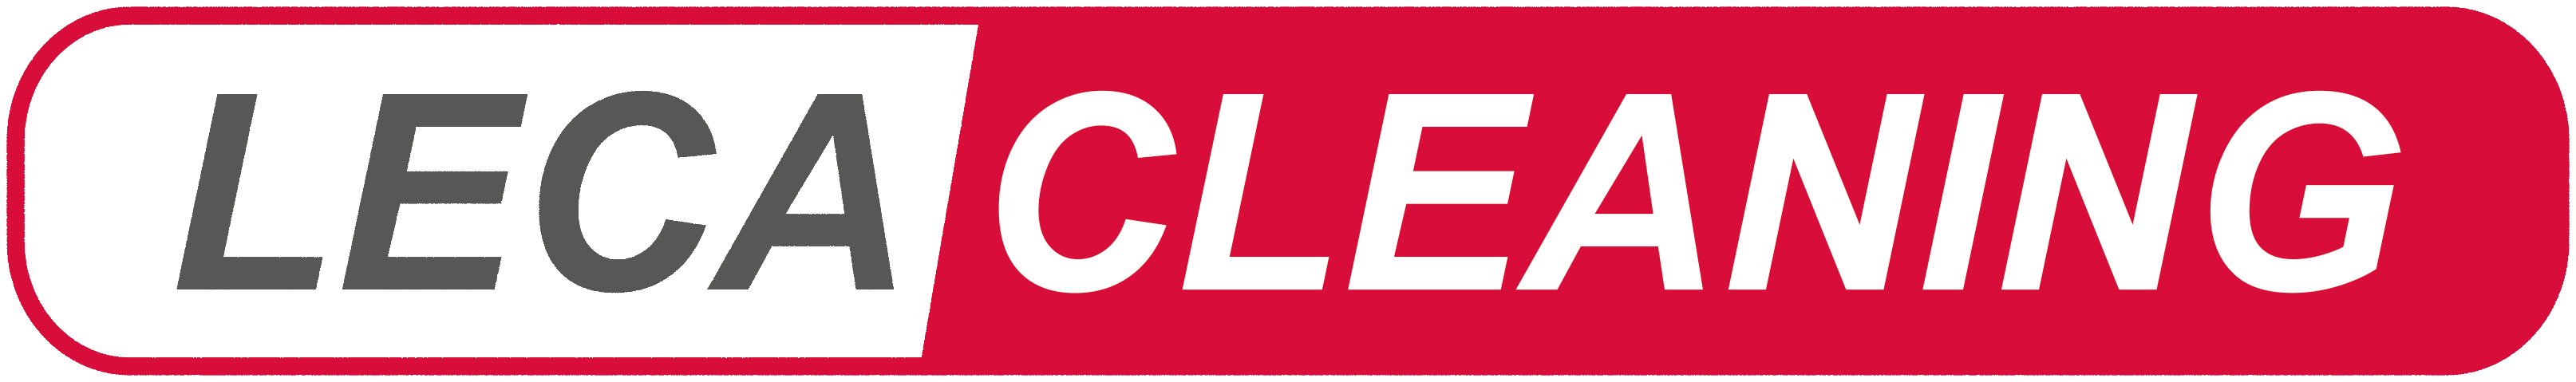 LecaCleaning-logo-2021_Rood-grijs.png